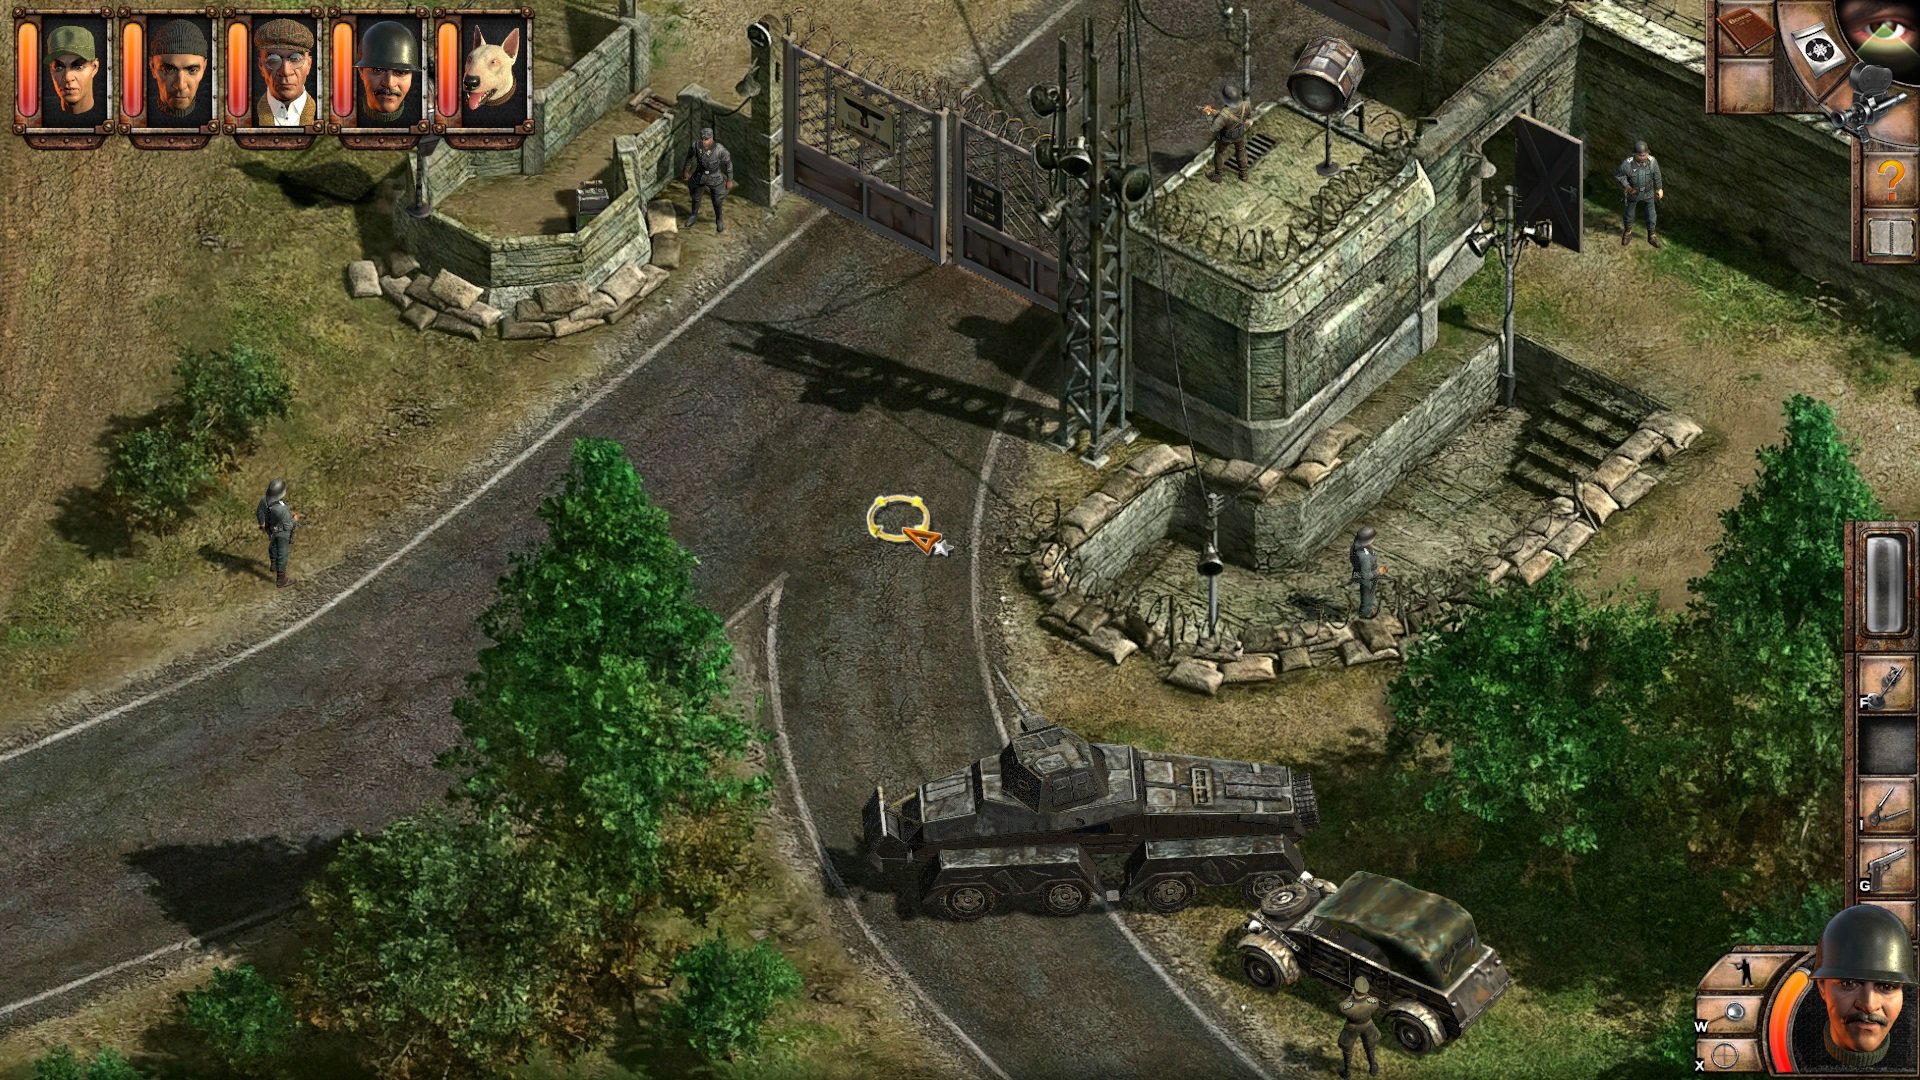 Commandos 2 & 3 – HD Remaster Double Pack